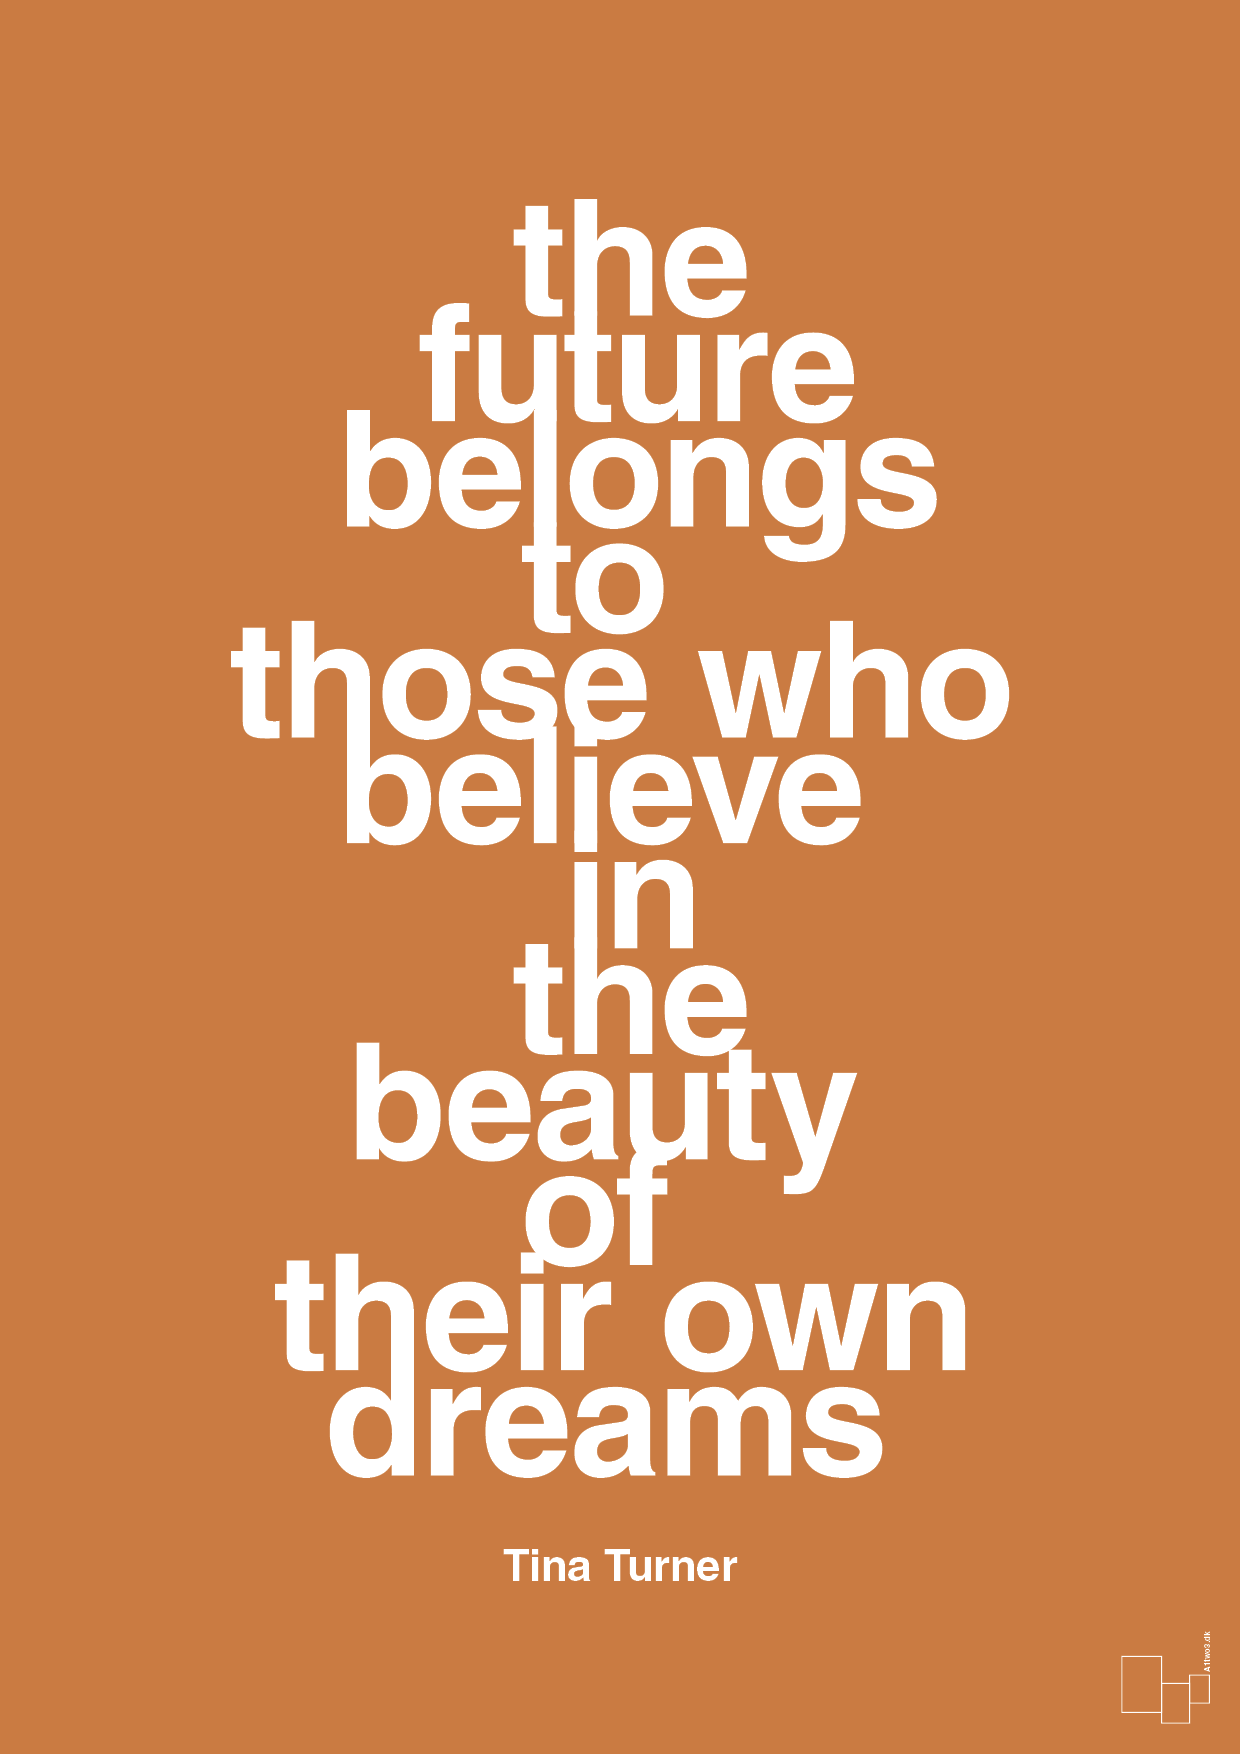 the future belongs to those who believe in the beauty of their own dreams - Plakat med Citater i Rumba Orange